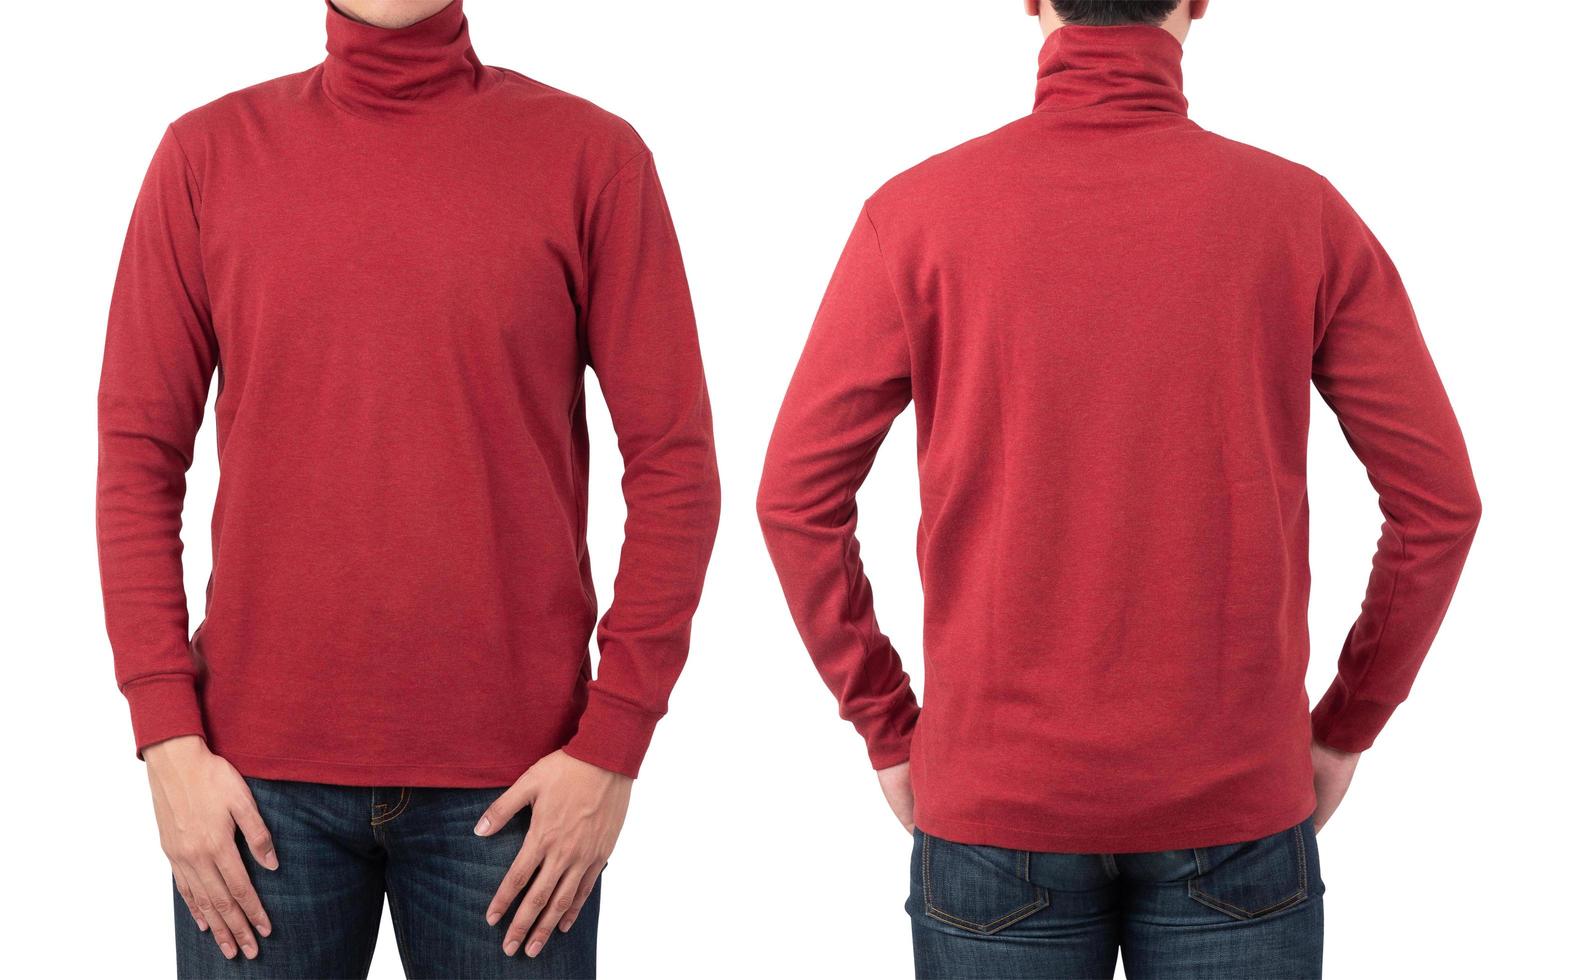 Model wearing red long sleeve t shirt isolated on white background with clipping path photo